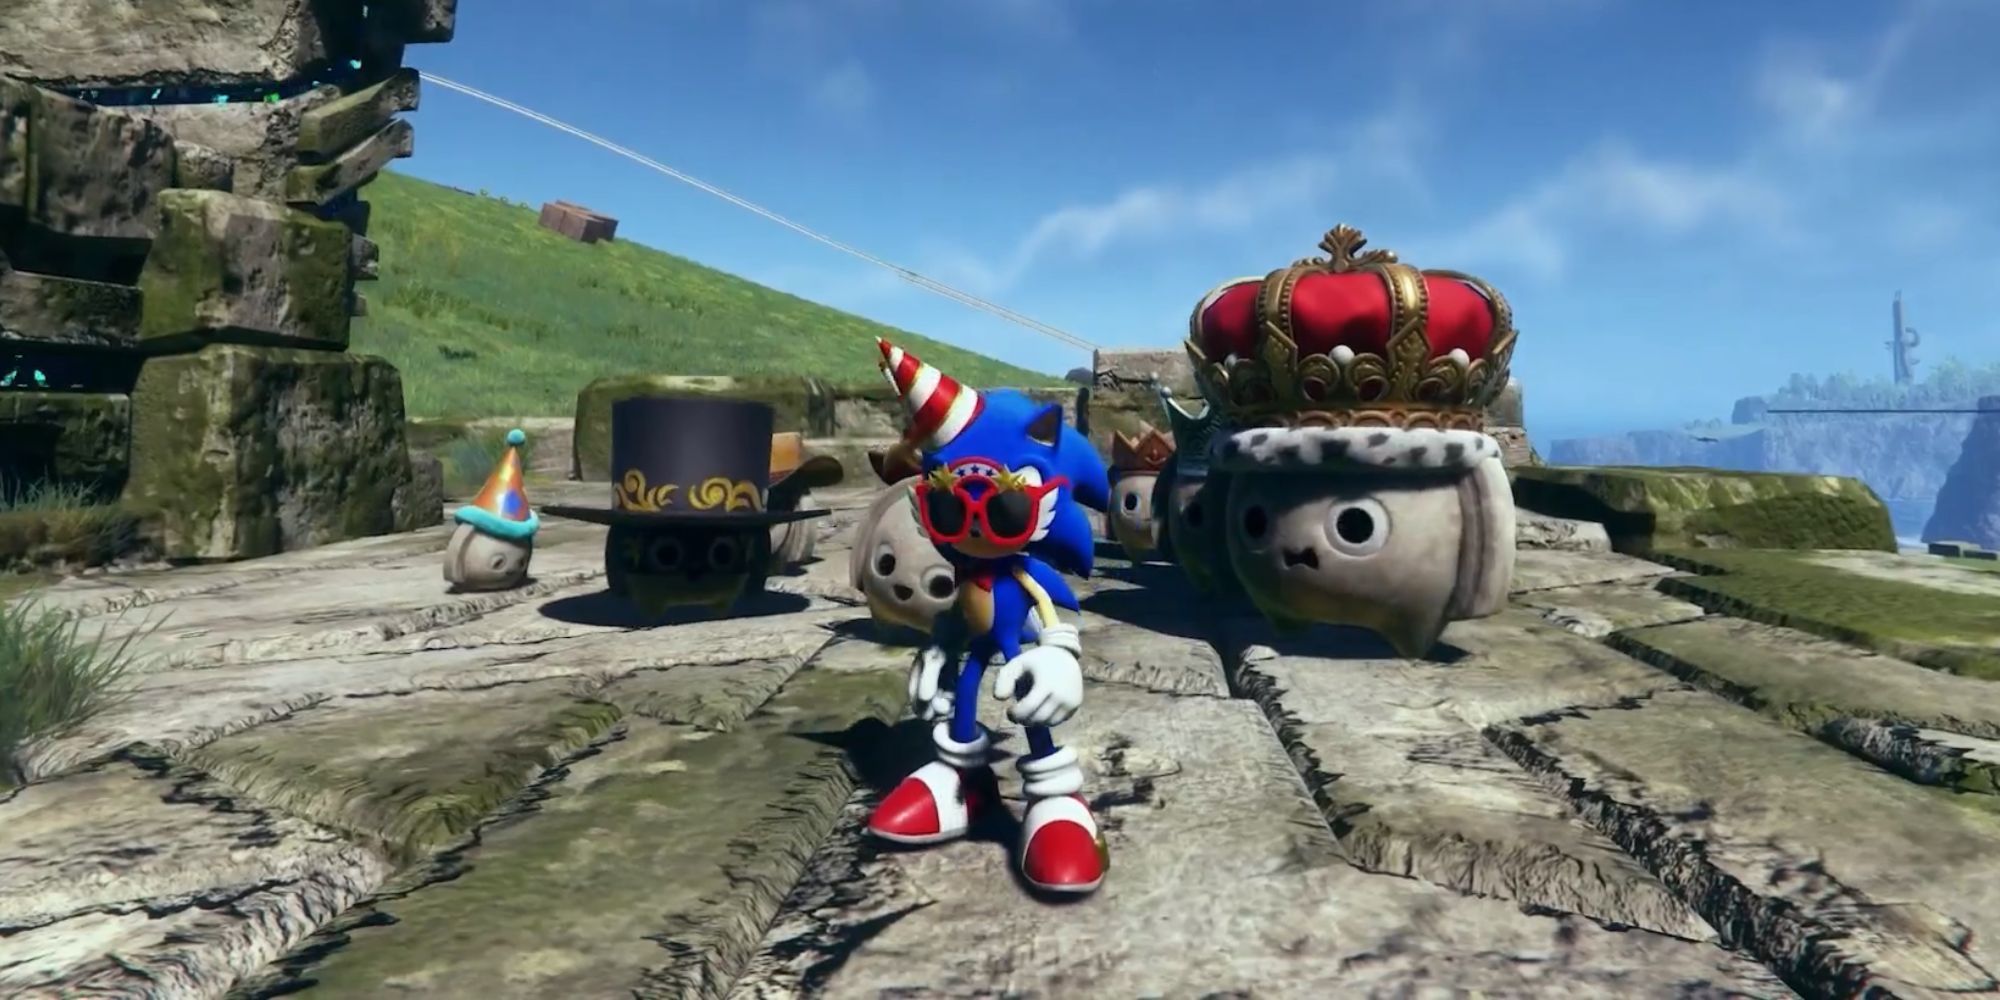 Sonic Frontiers 'Update 2' to be featured during Sonic Central